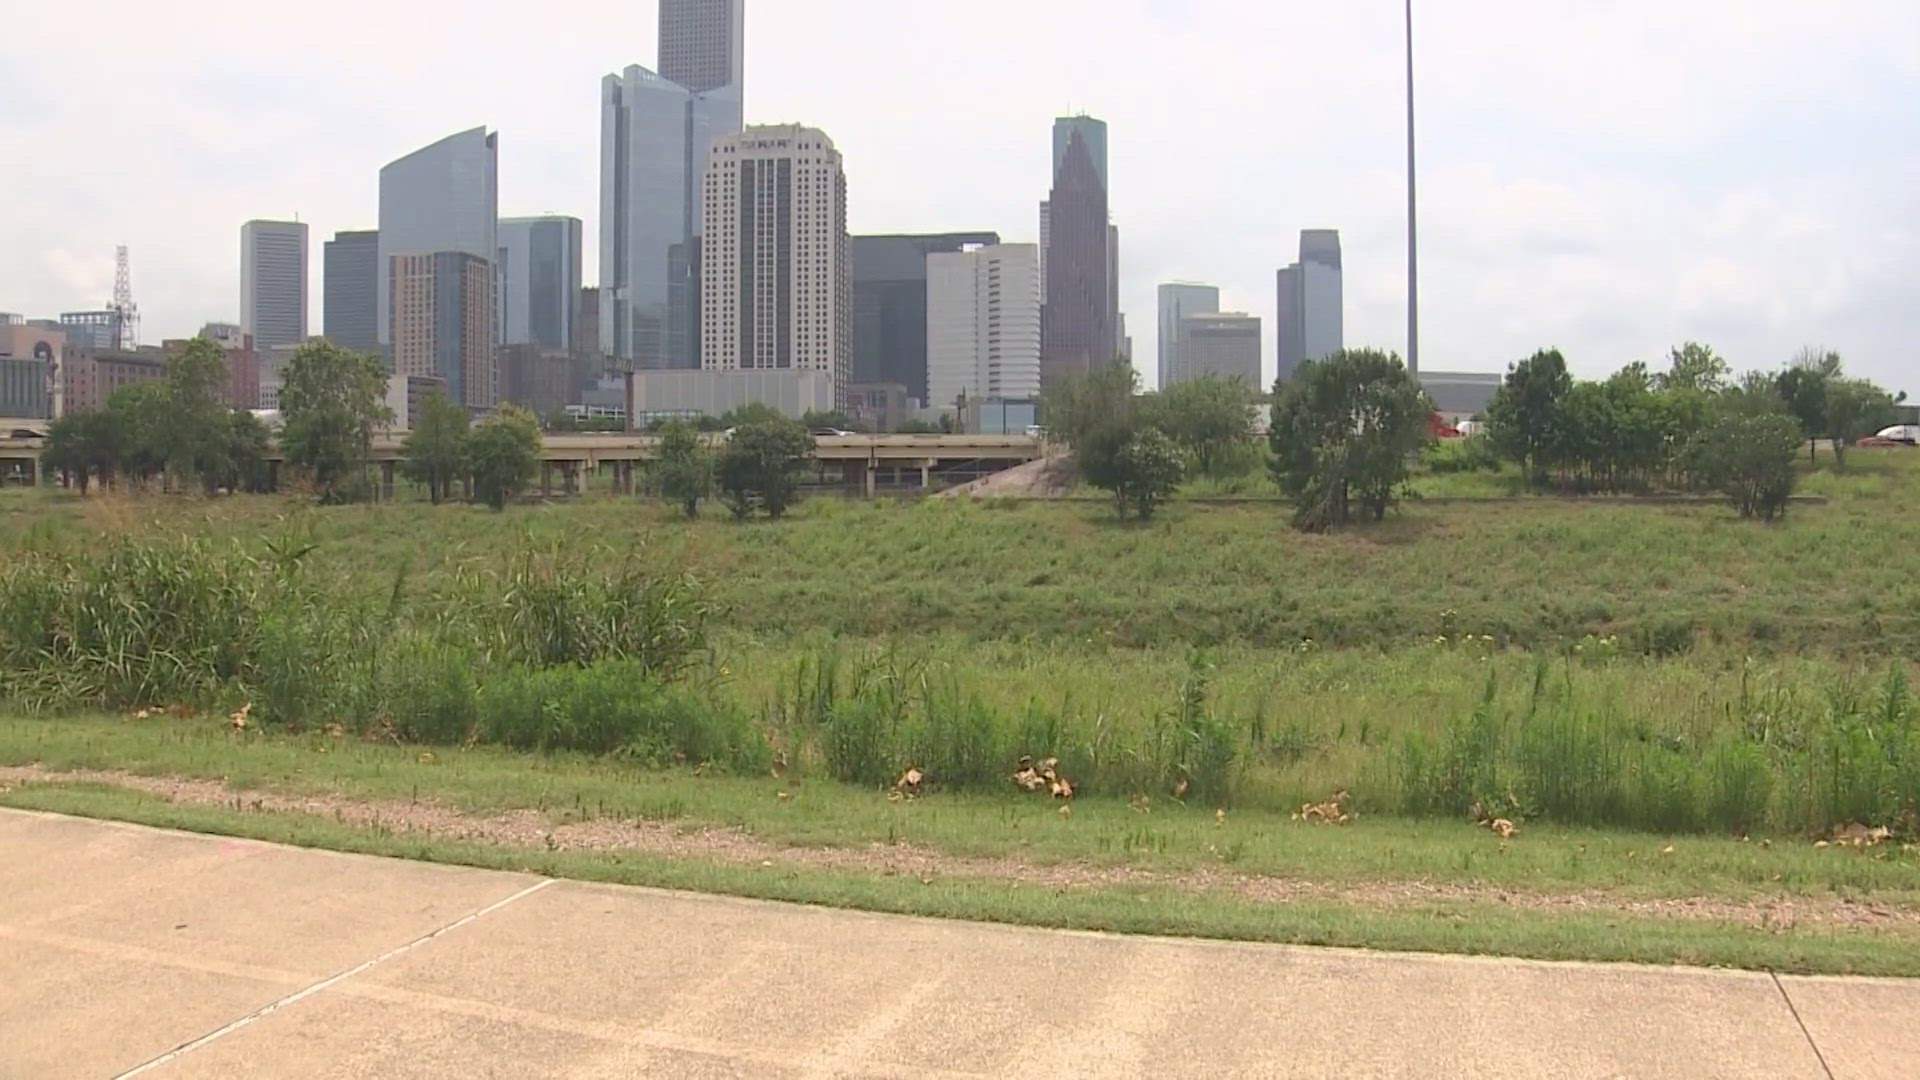 The city sold 3 acres of land that encompasses the White Oak Bayou Greenway next to UH-Downtown -- west of North Main Street and south of Hogan Street.